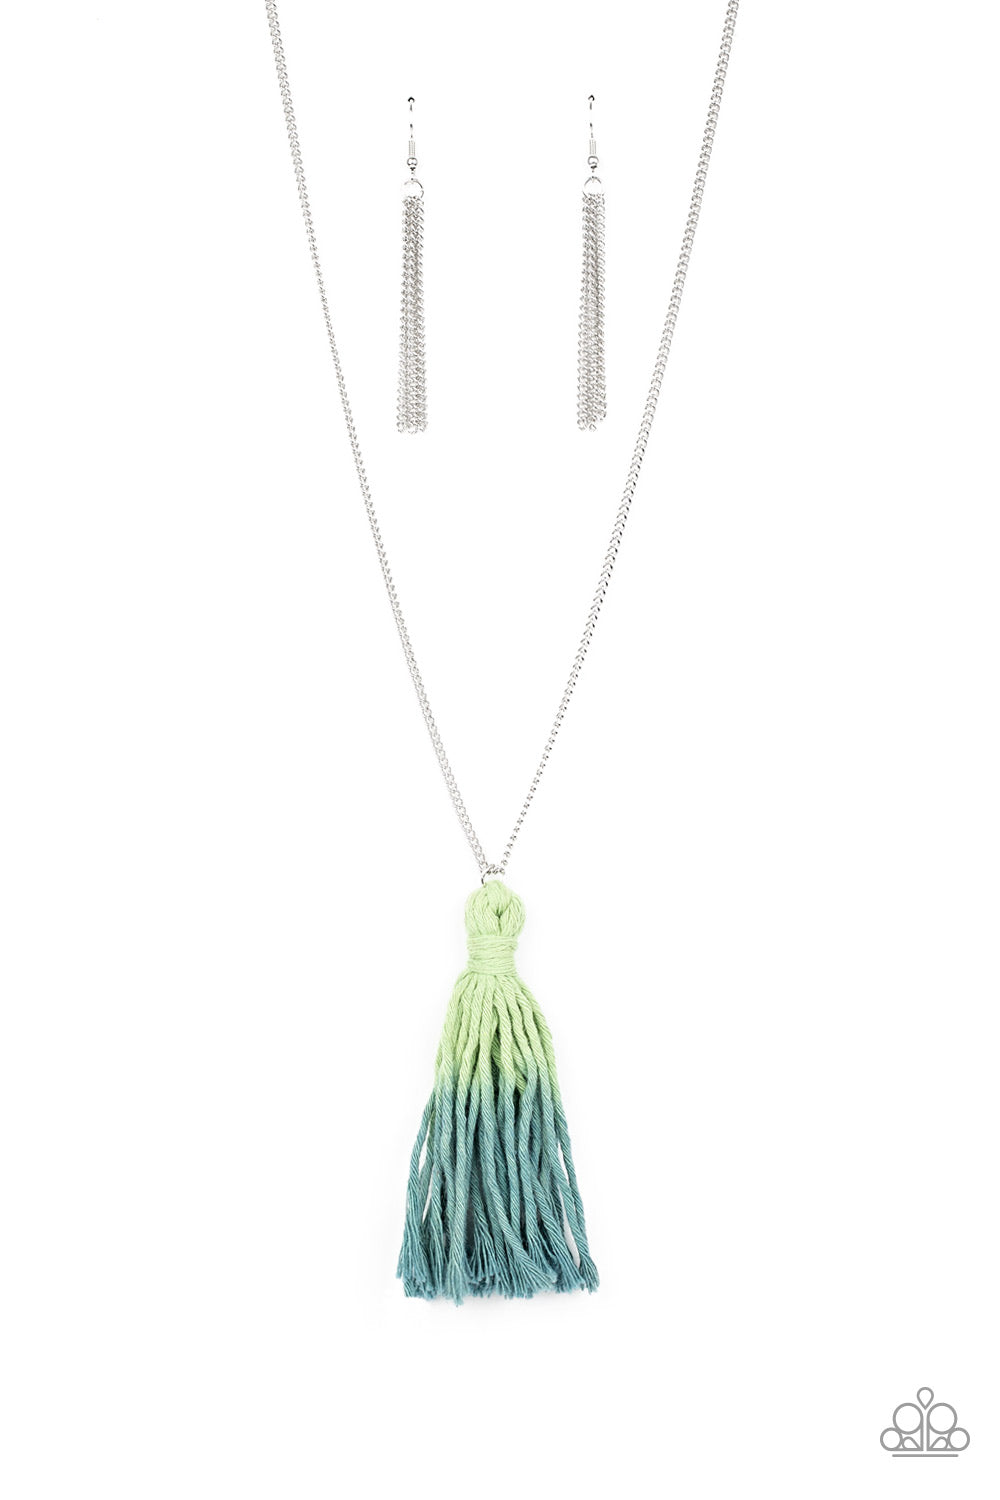 Totally Tasseled - green - Paparazzi necklace